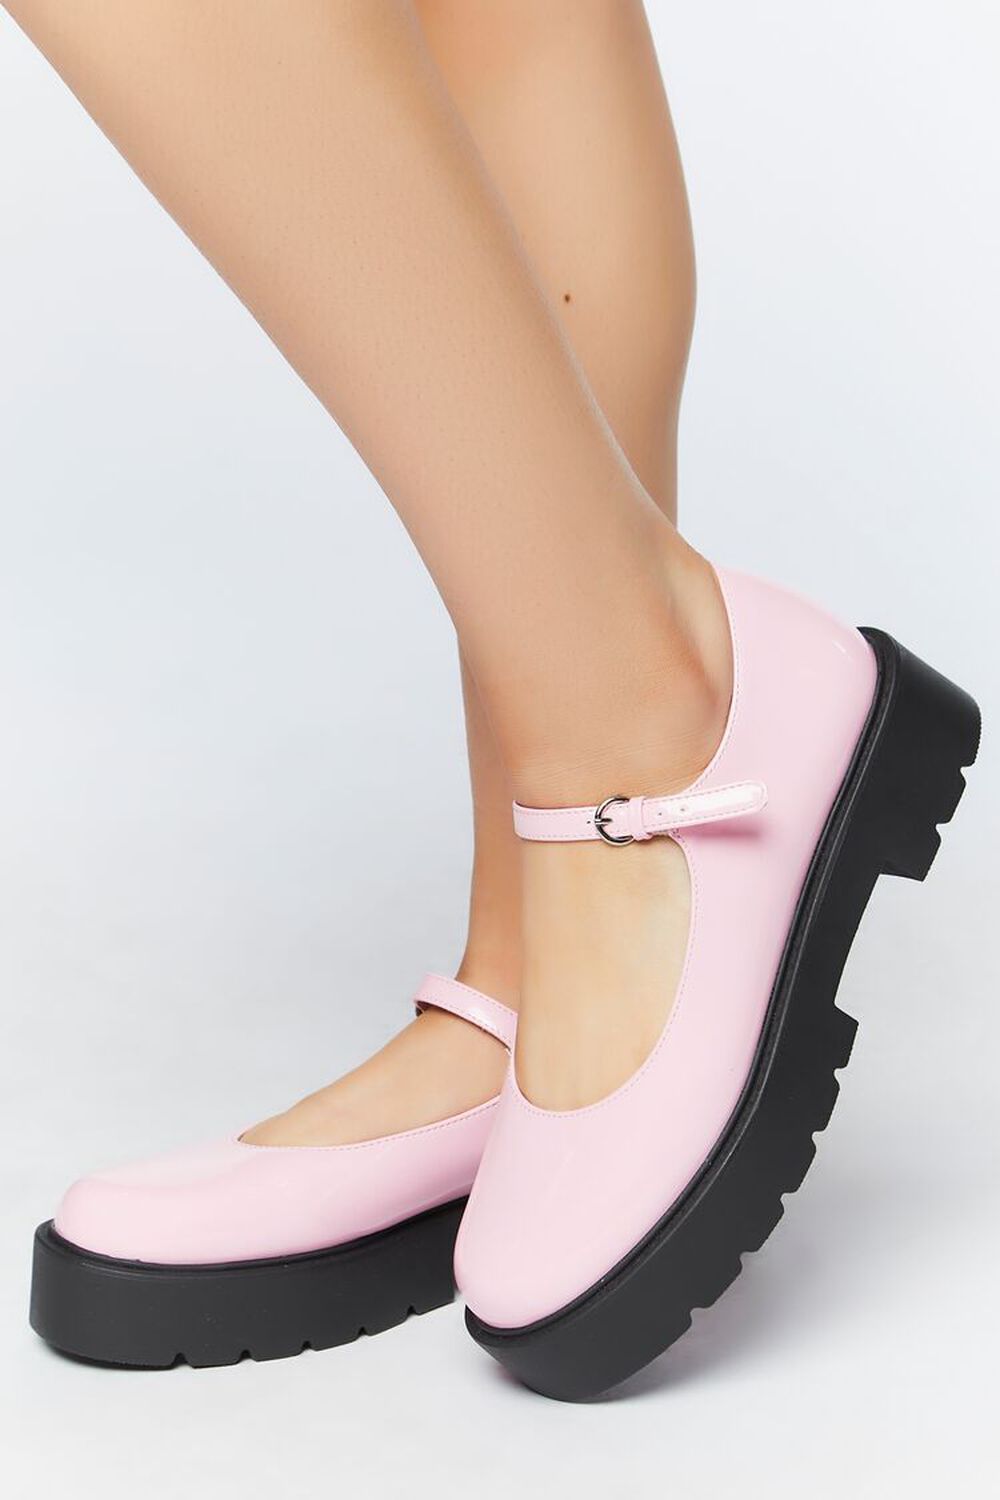 PINK Faux Patent Leather Mary Jane Flatforms, image 1